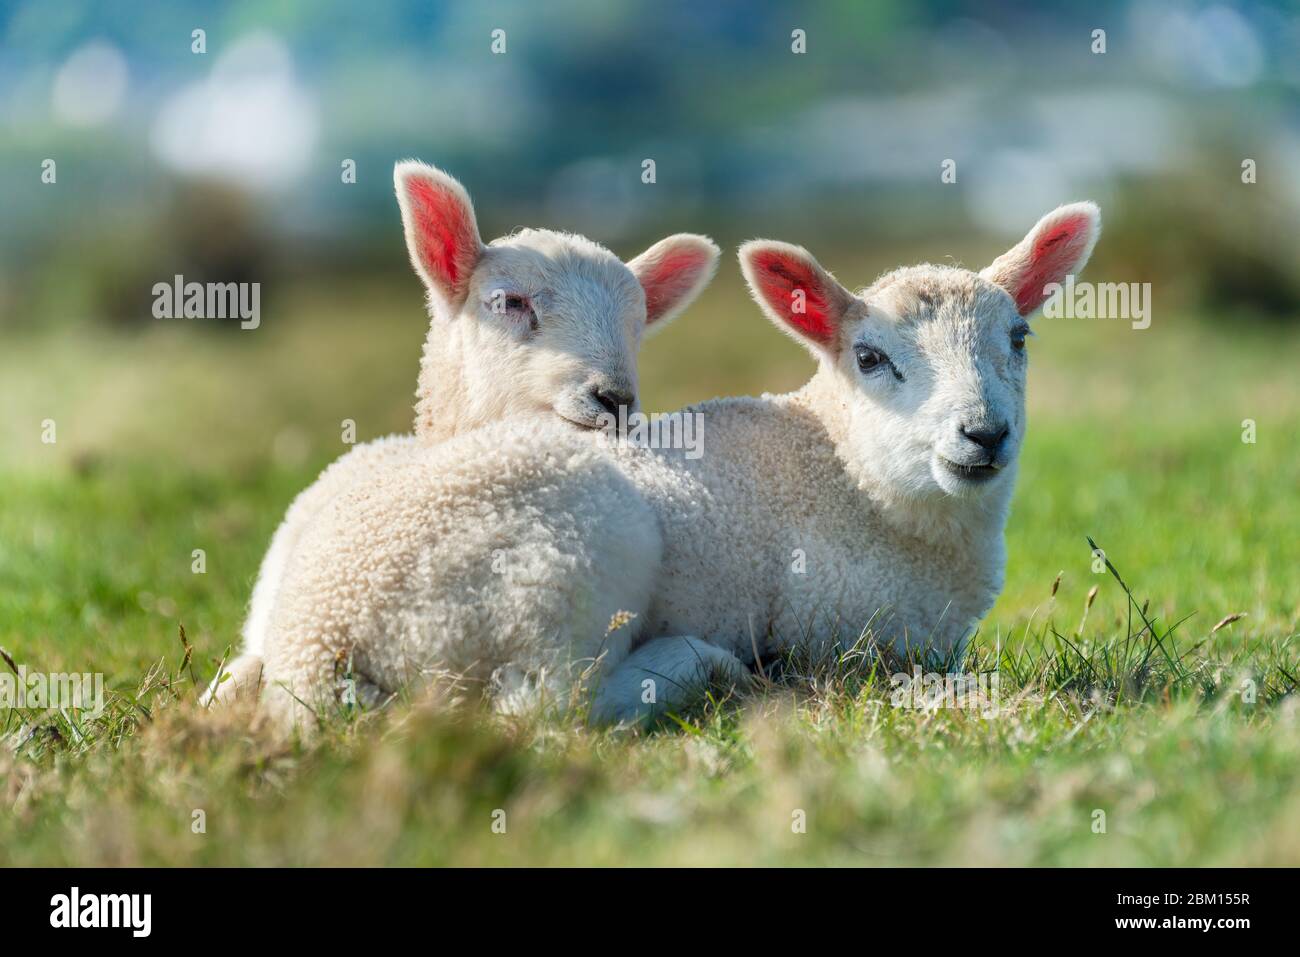 Appledore, North Devon, England. Wednesday 6th May 2020. UK Weather. Another warm and sunny day on the coast in North Devon as two lambs enjoy the sunshine on Northam Burrows near Appledore. Credit: Terry Mathews/Alamy Live News Stock Photo